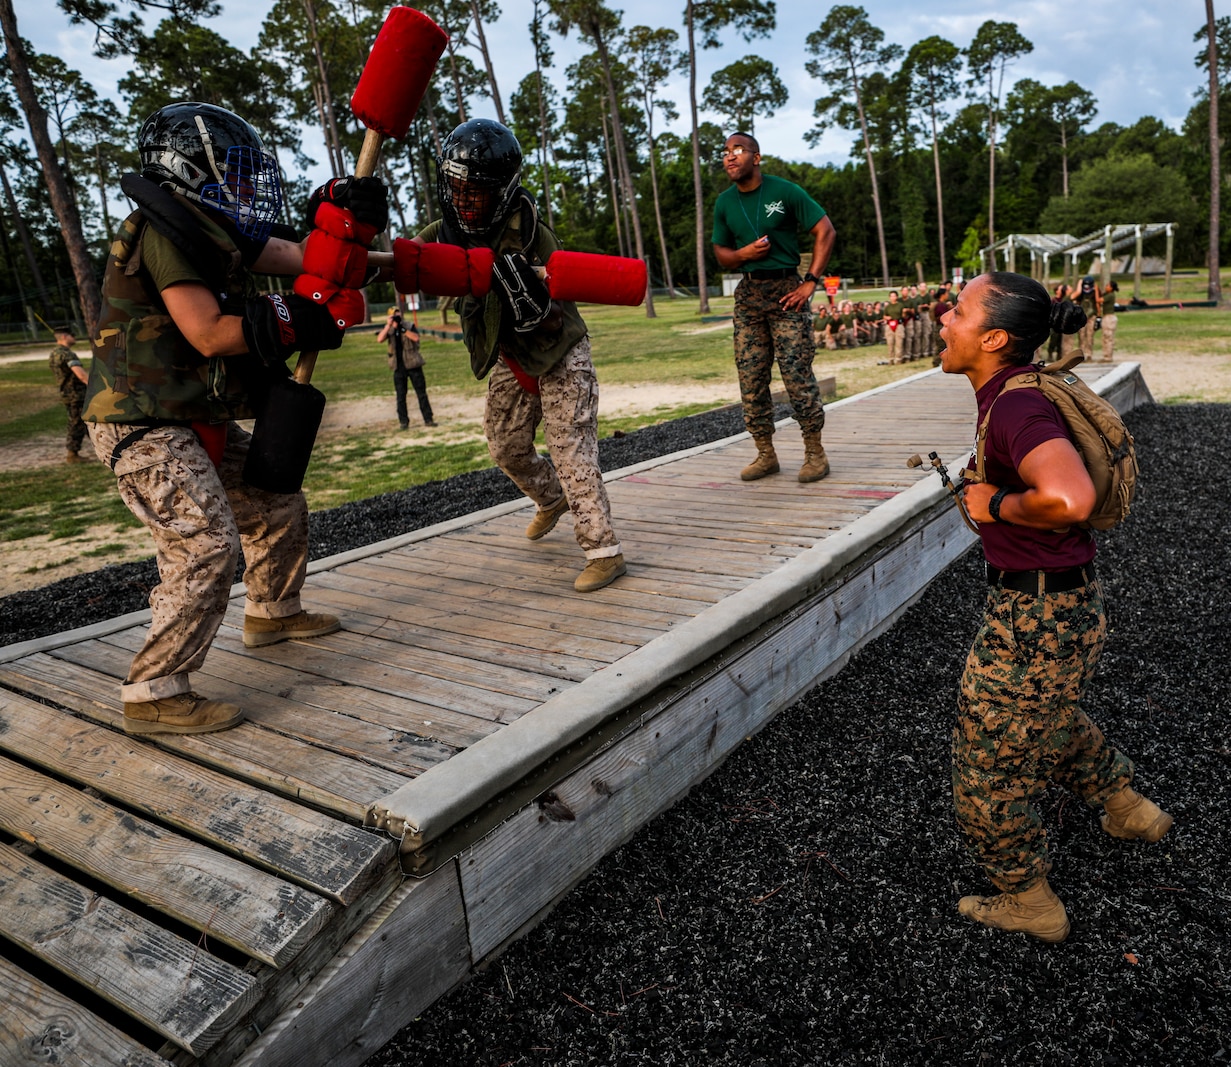 Recruits with Papa Company, 4th Recruit Training Battalion, engage pugil sticks at Marine Corps Recruit Depot Parris Island, S.C., May 31, 2019. Body sparring and pugil sticks help recruits apply the fundamentals of Marine Corps martial arts. (U.S. Marine Corps Photo by Cpl. Andrew Neumann)